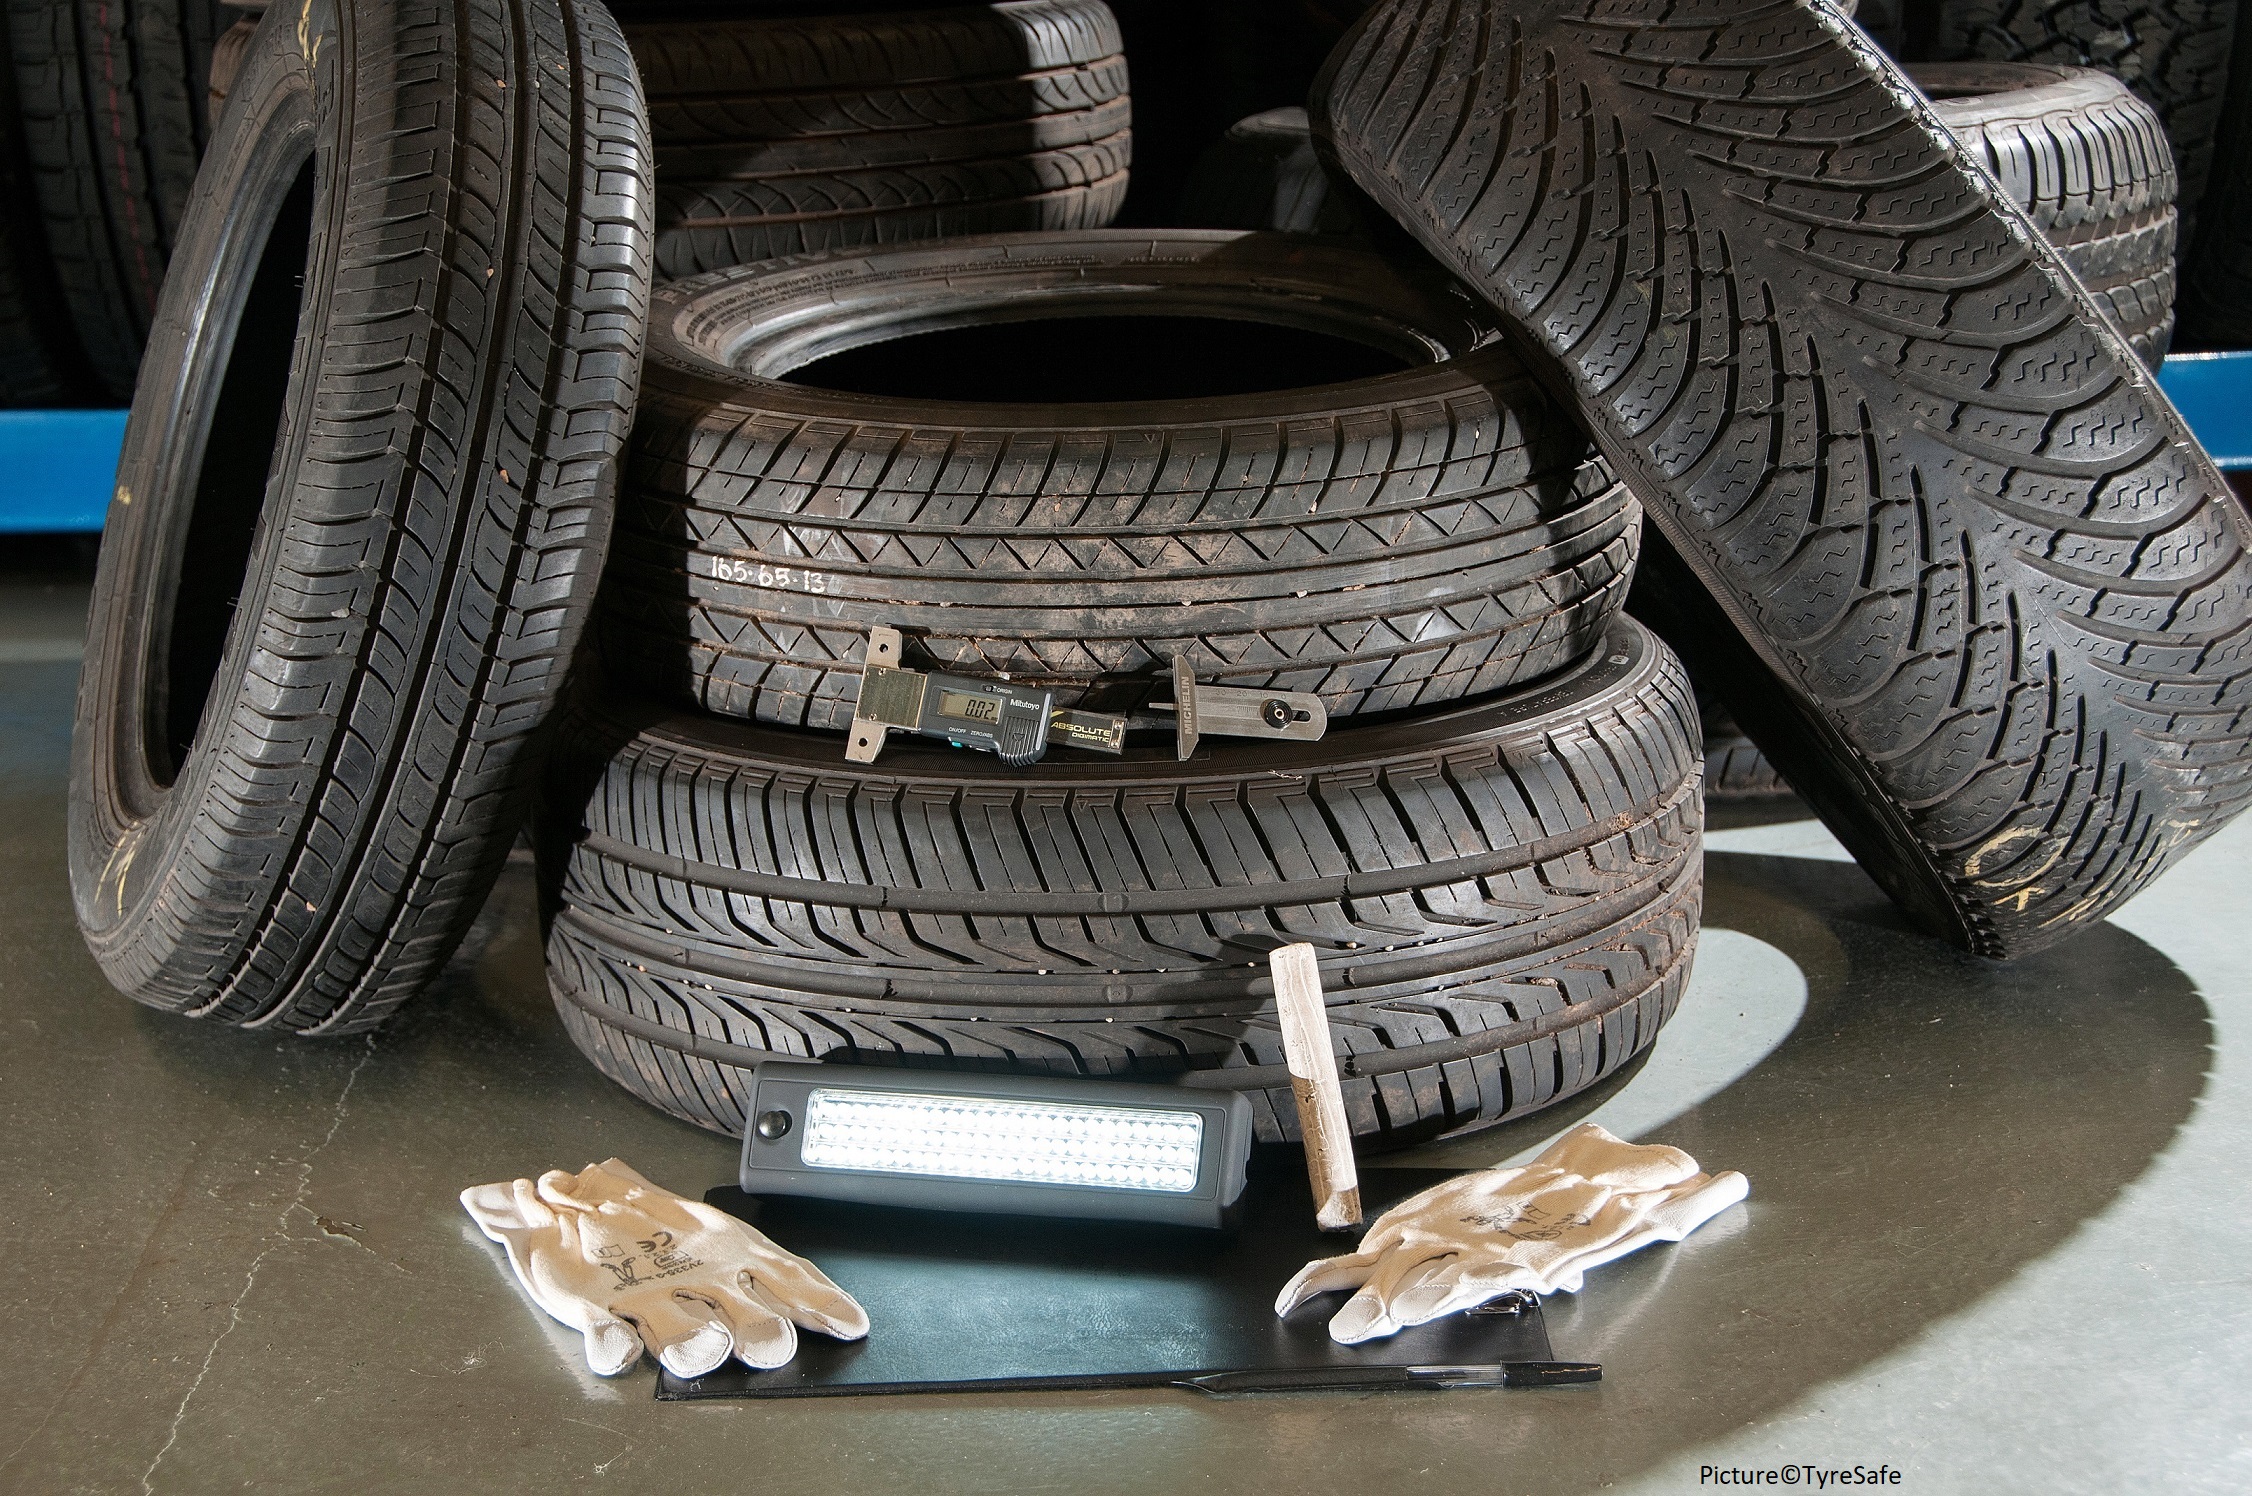 I’m thinking of buying part-worn tyres for my car. How risky is that?